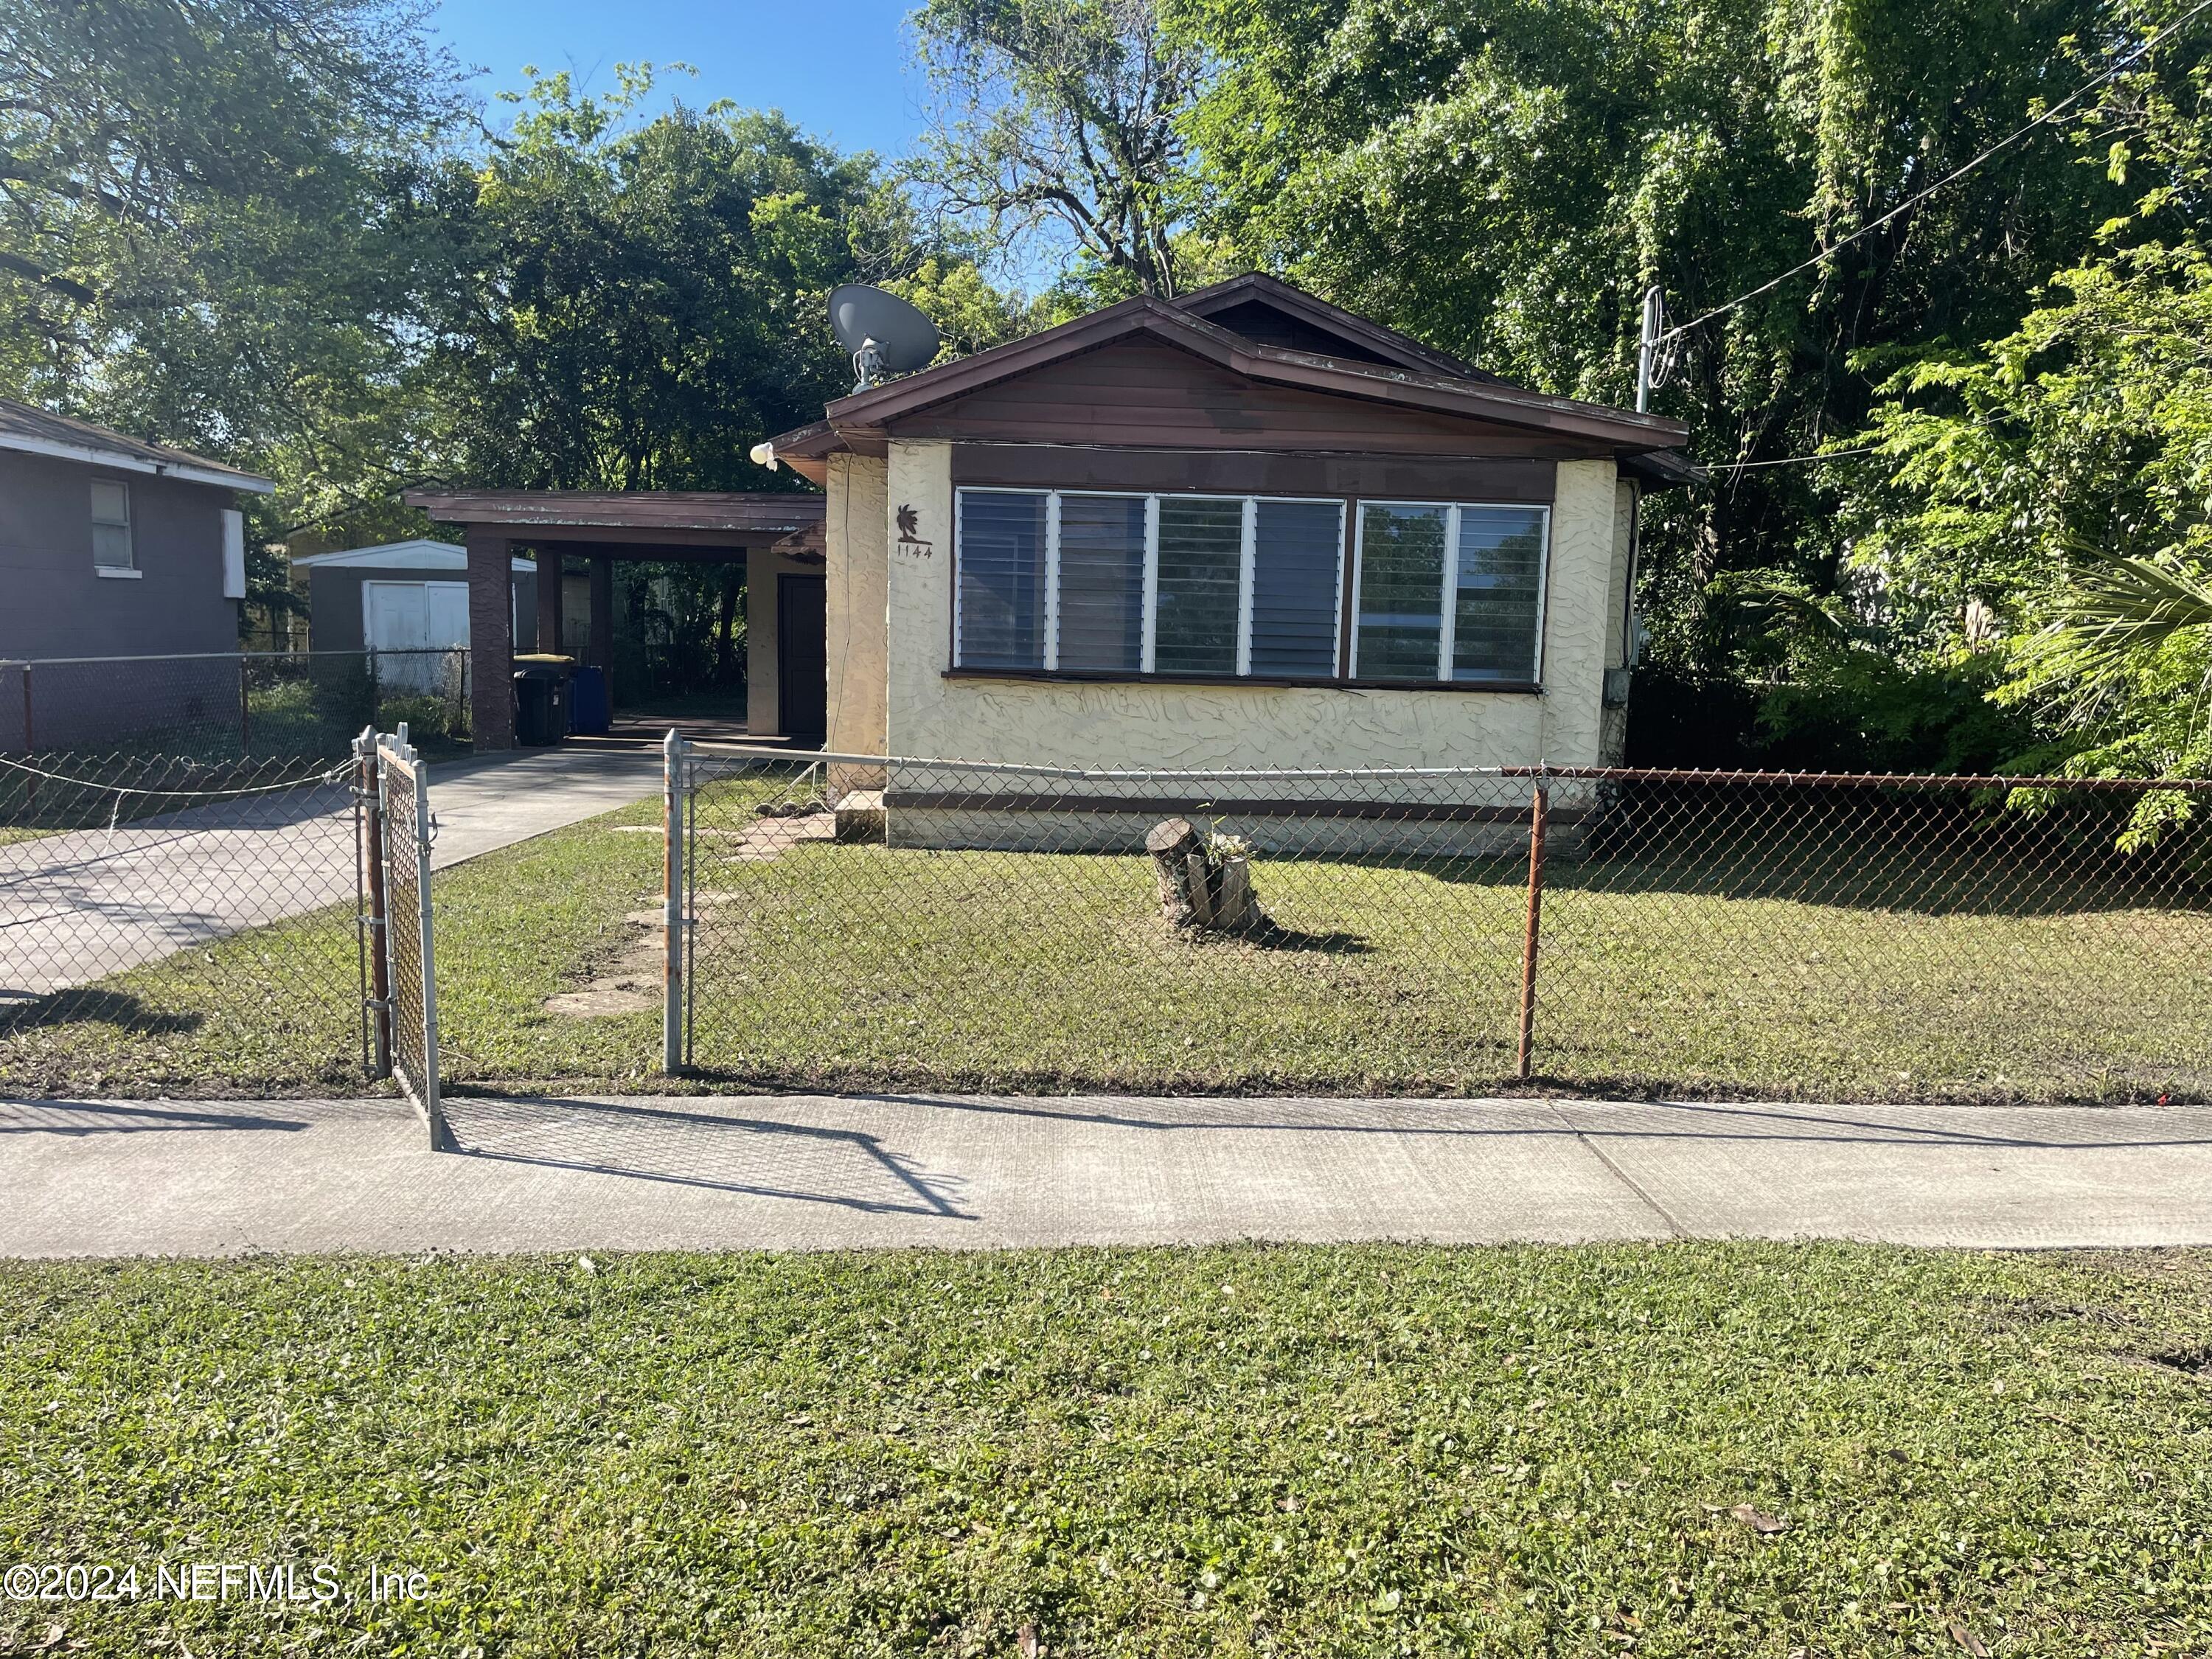 Jacksonville, FL home for sale located at 1144 E 15th Street, Jacksonville, FL 32206